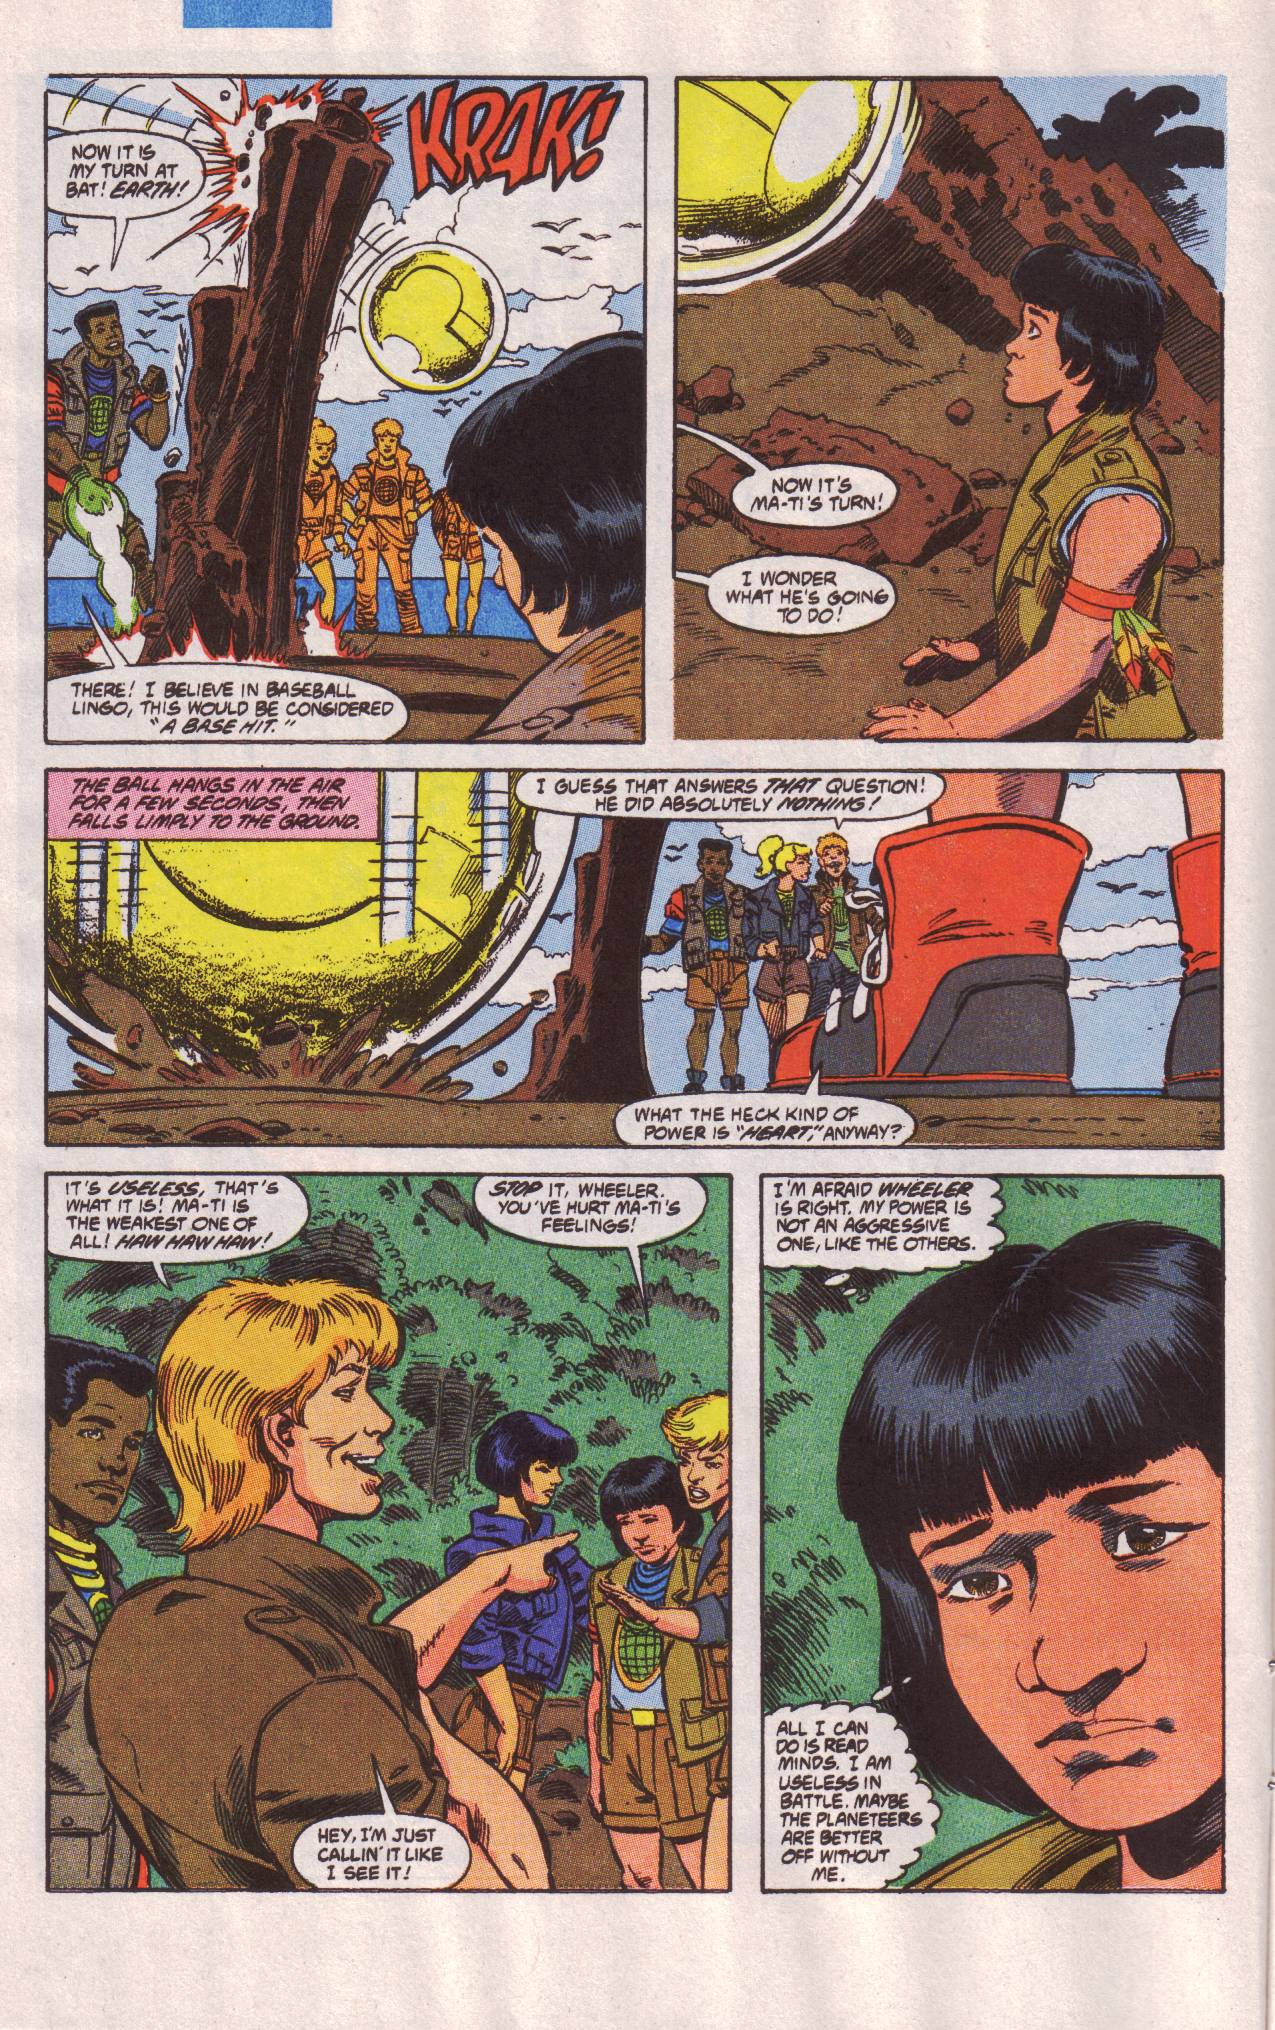 Captain Planet And The Planeteers Issue 3 | Read Captain Planet And The  Planeteers Issue 3 comic online in high quality. Read Full Comic online for  free - Read comics online in high quality .